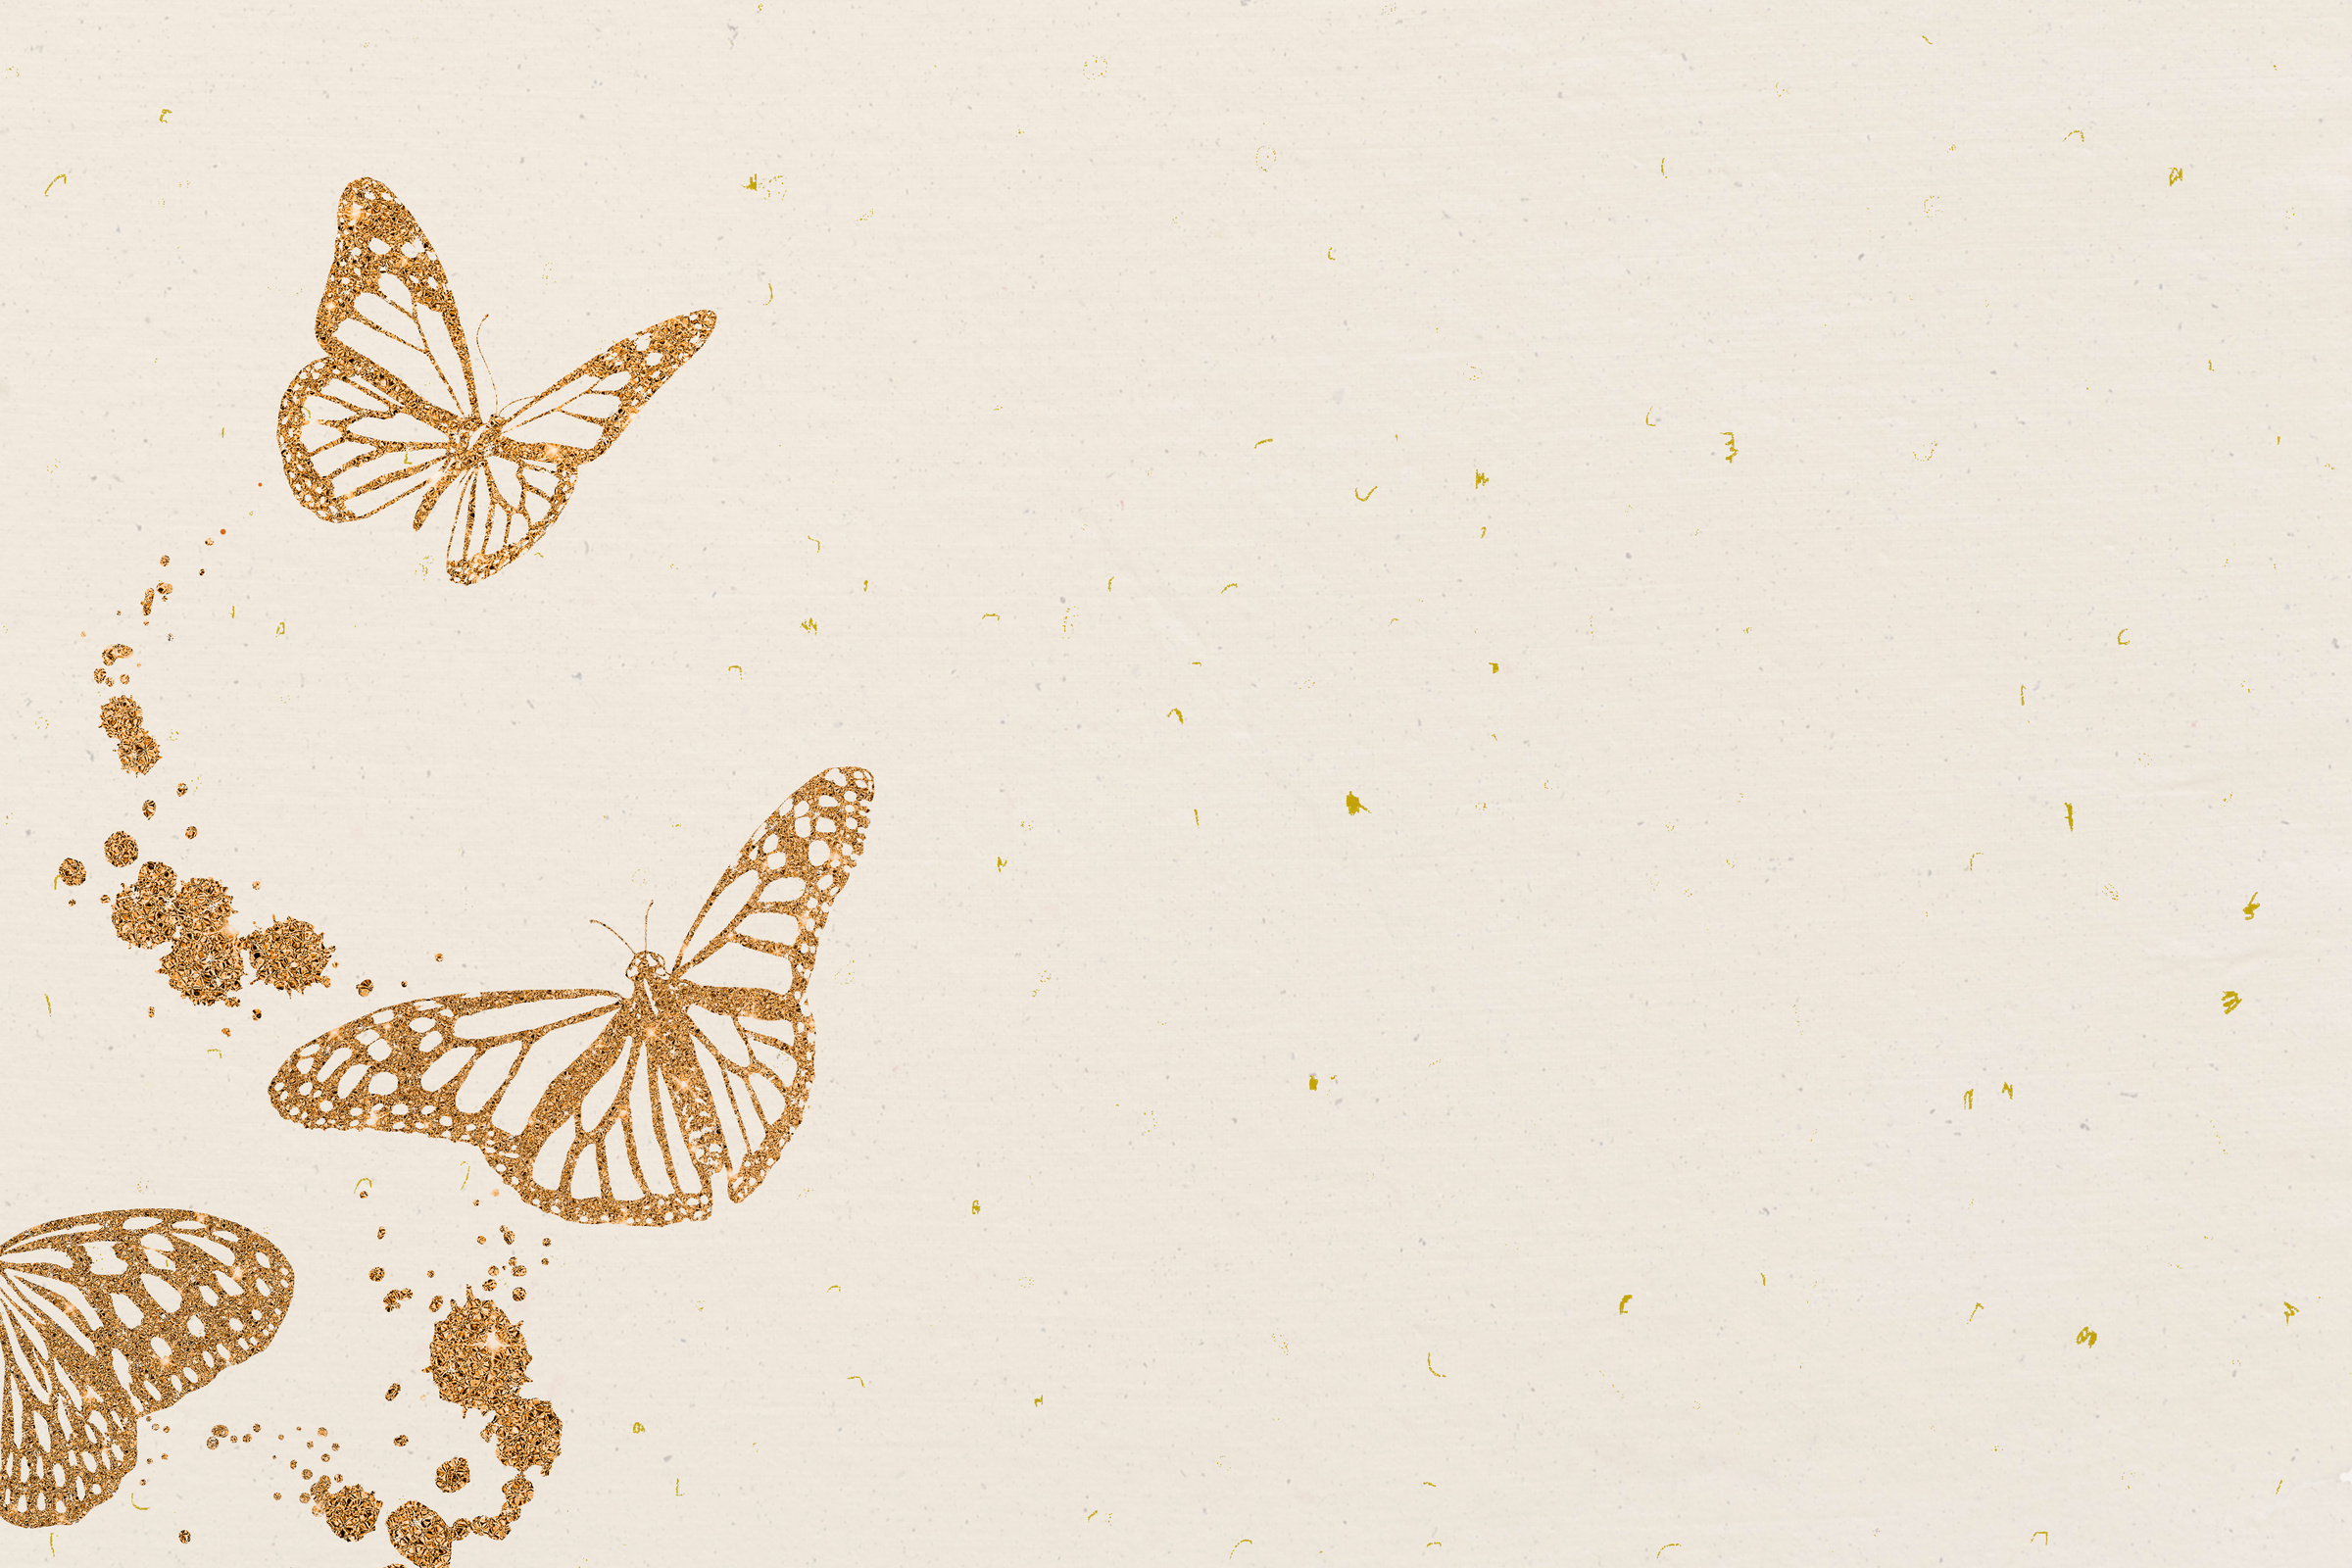 Gold Butterfly on the creamy paper